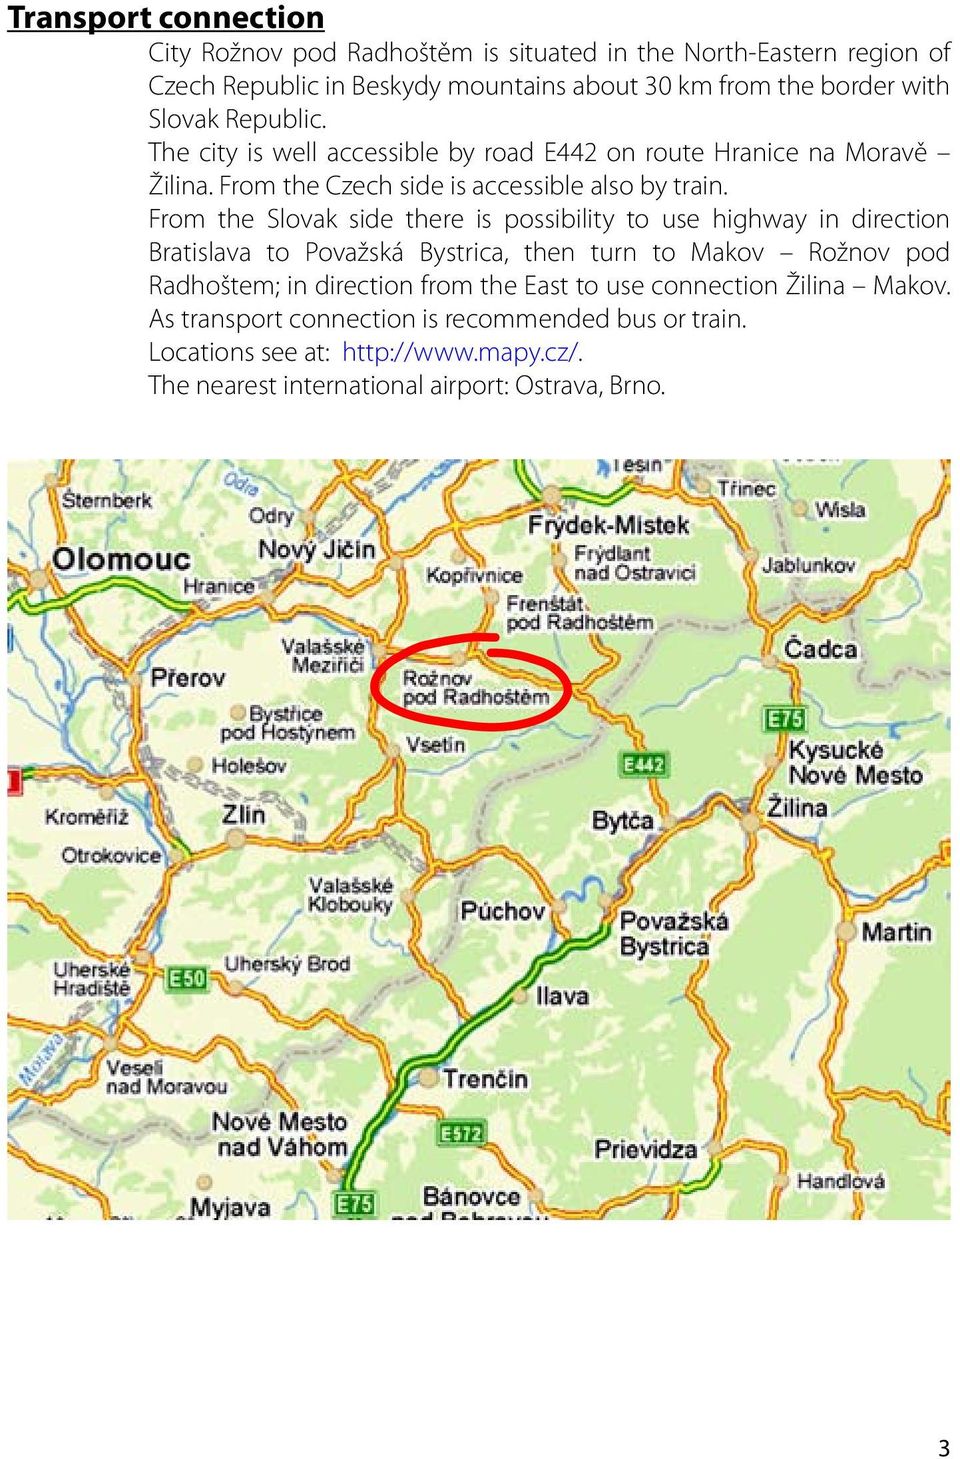 From the Slovak side there is possibility to use highway in direction Bratislava to Považská Bystrica, then turn to Makov Rožnov pod Radhoštem; in direction from